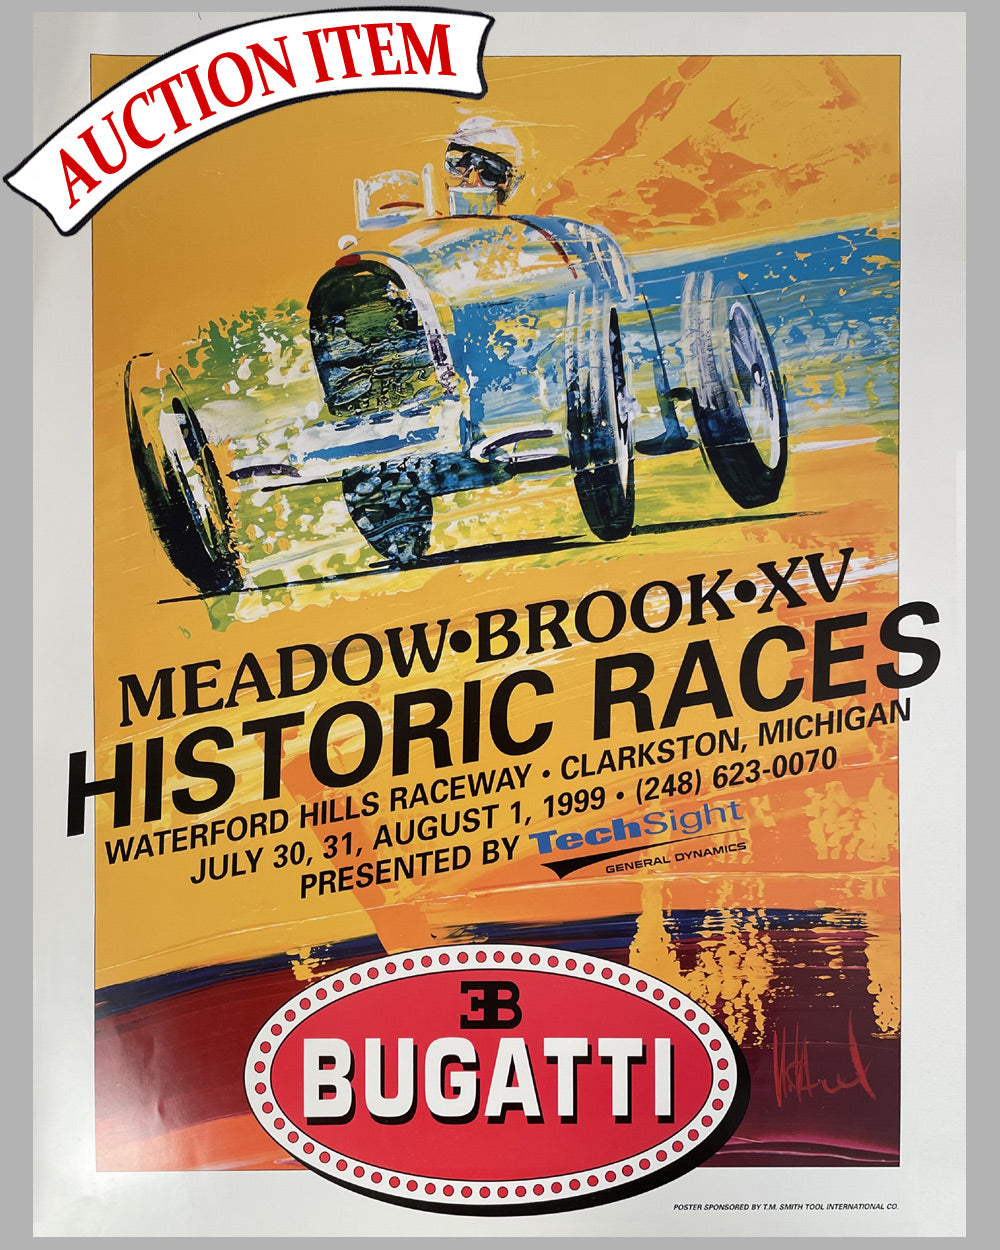 1999 Meadowbrook Historic Race official poster featuring Bugatti